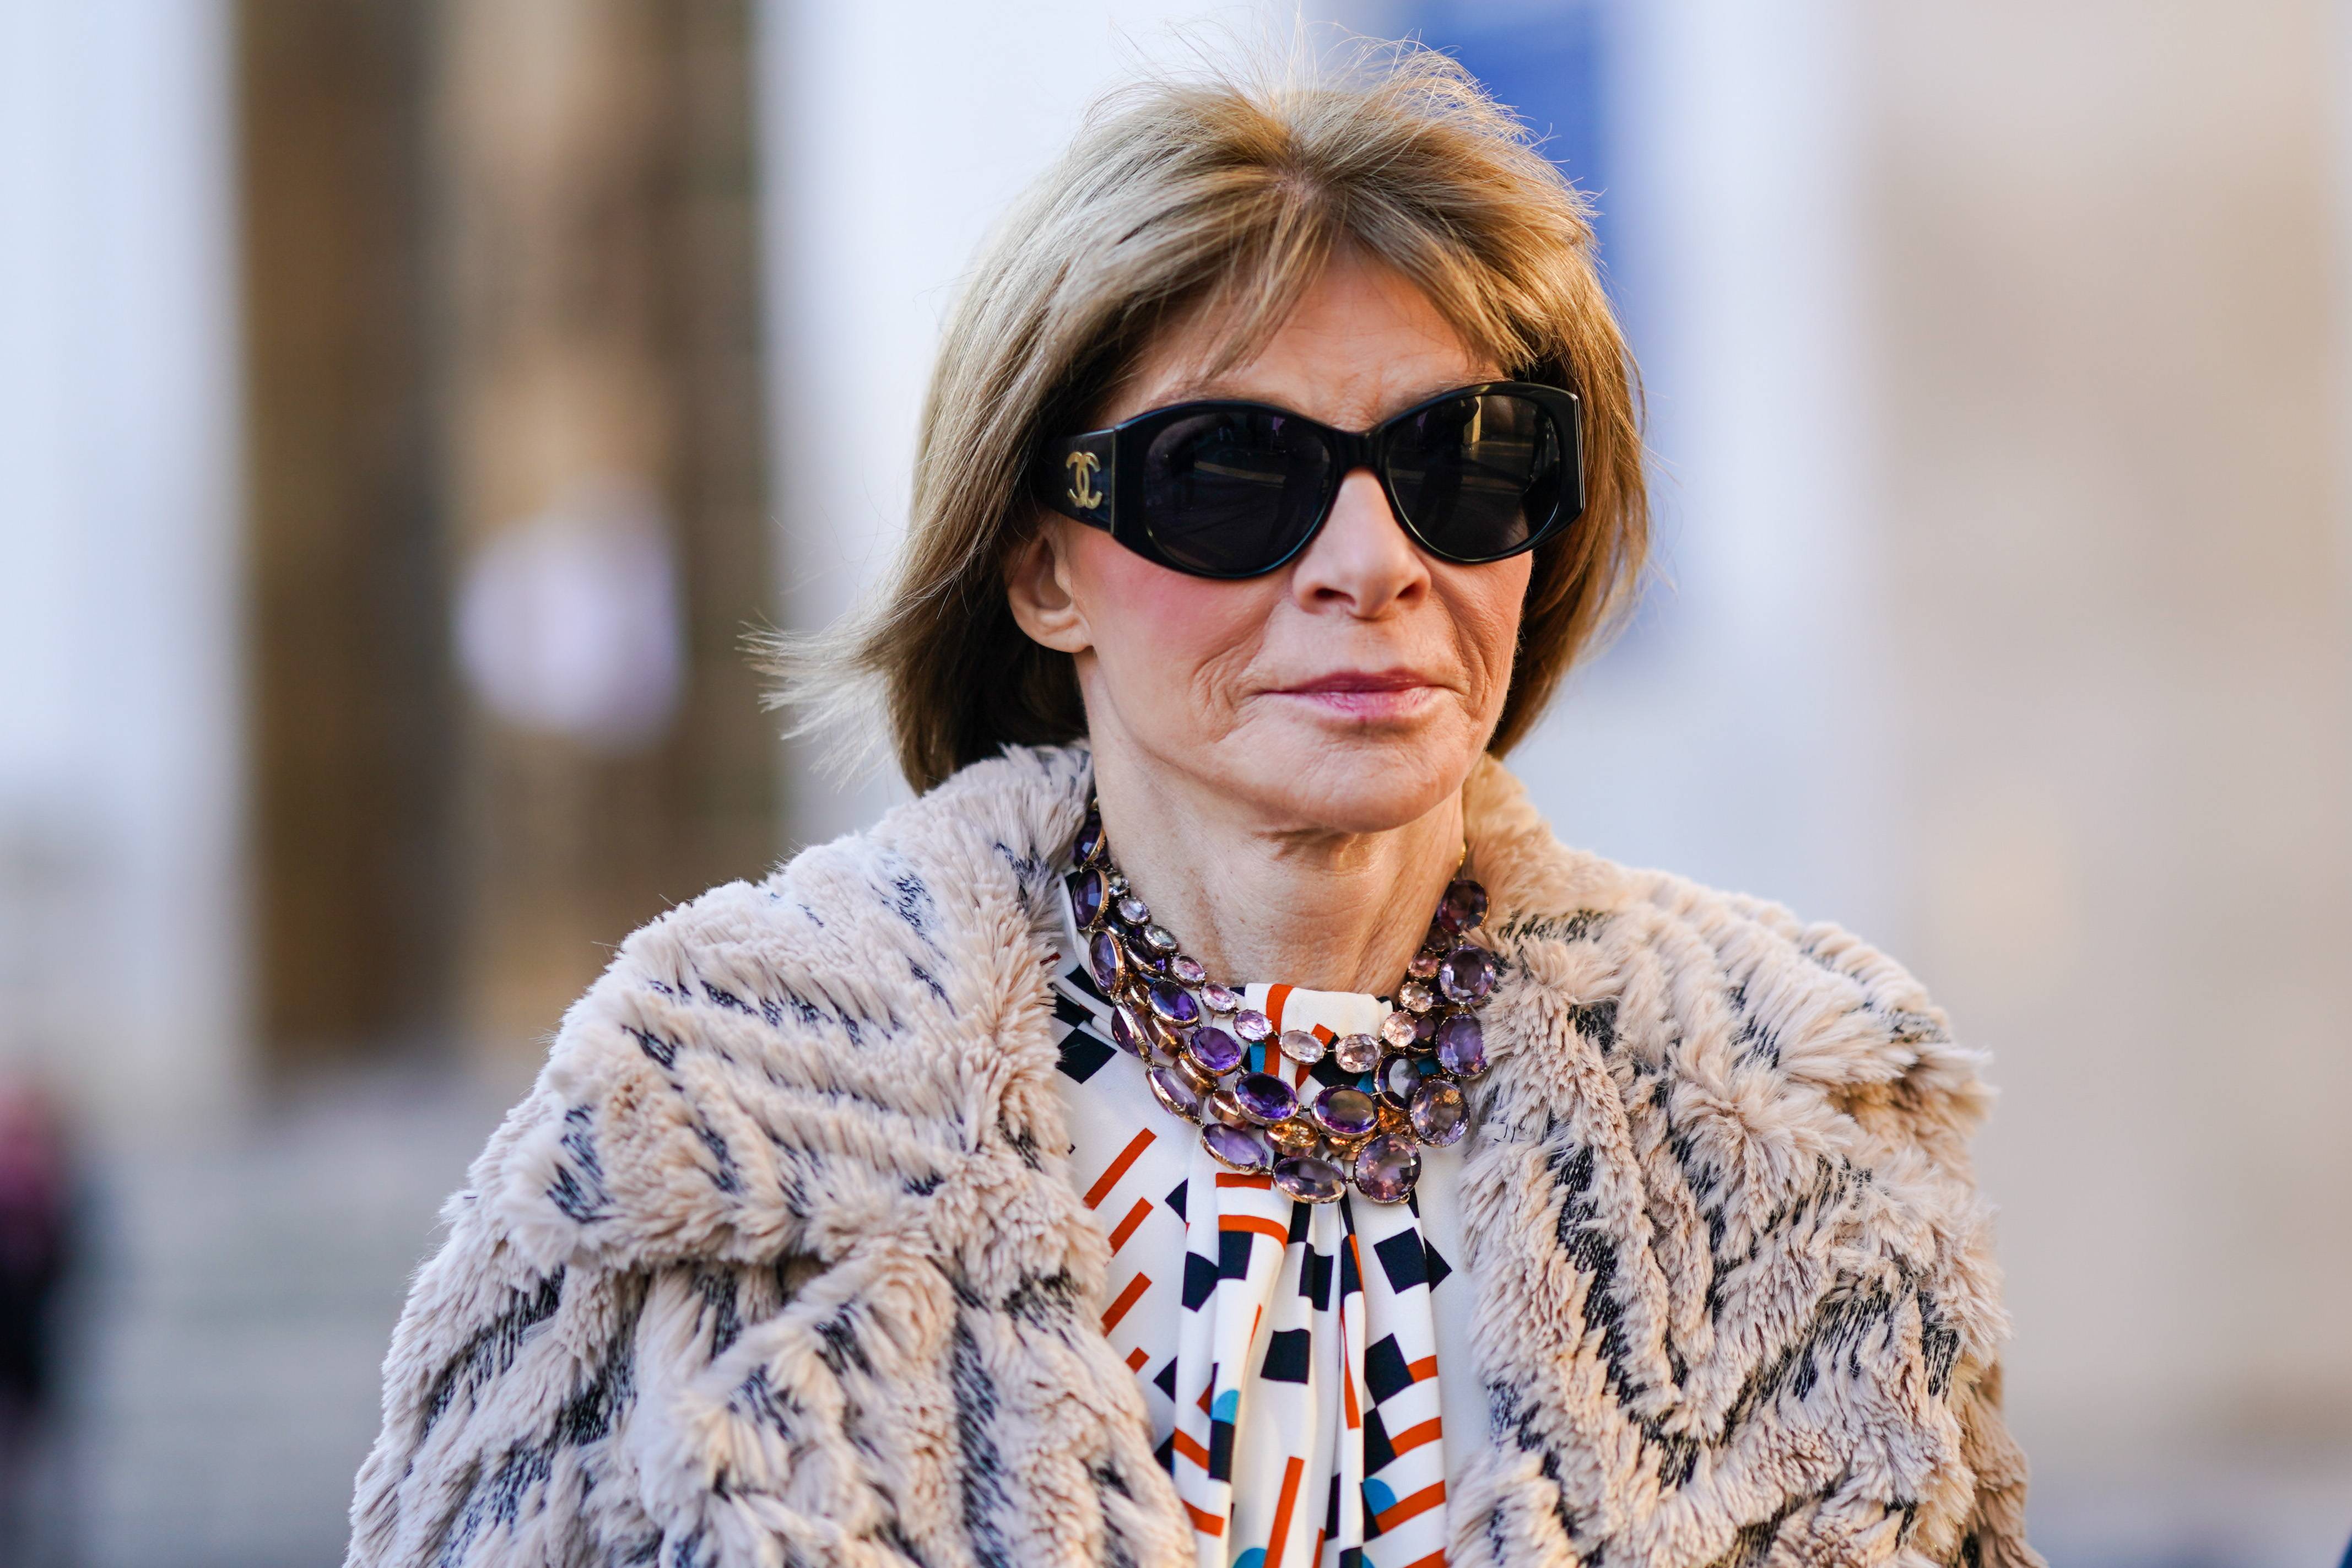 PARIS, FRANCE - JANUARY 20: Anna Wintour is seen, outside Schiaparelli, during Paris Fashion Week - Haute Couture Spring/Summer 2020, on January 20, 2020 in Paris, France. (Photo by Edward Berthelot/Getty Images )